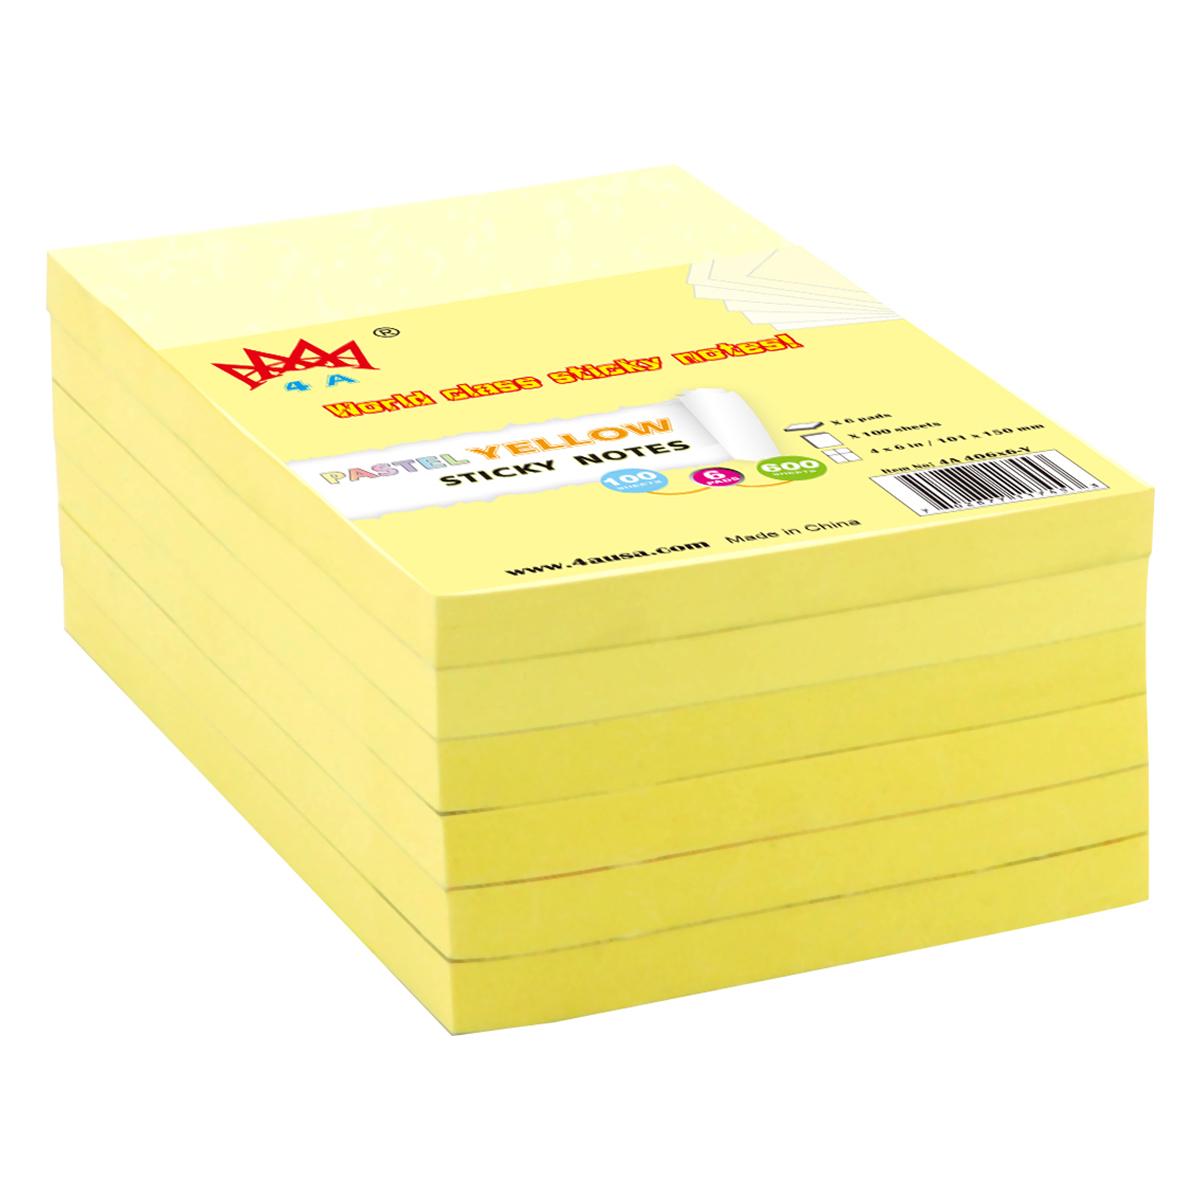 4A Sticky Big Pad,15 x 15 In,Large Size,Neon Yellow,Orange,Red and Green,Self-Stick Notes,30 Sheets/Pad,4 Pads/Pack,4A BP 1515-Nx4